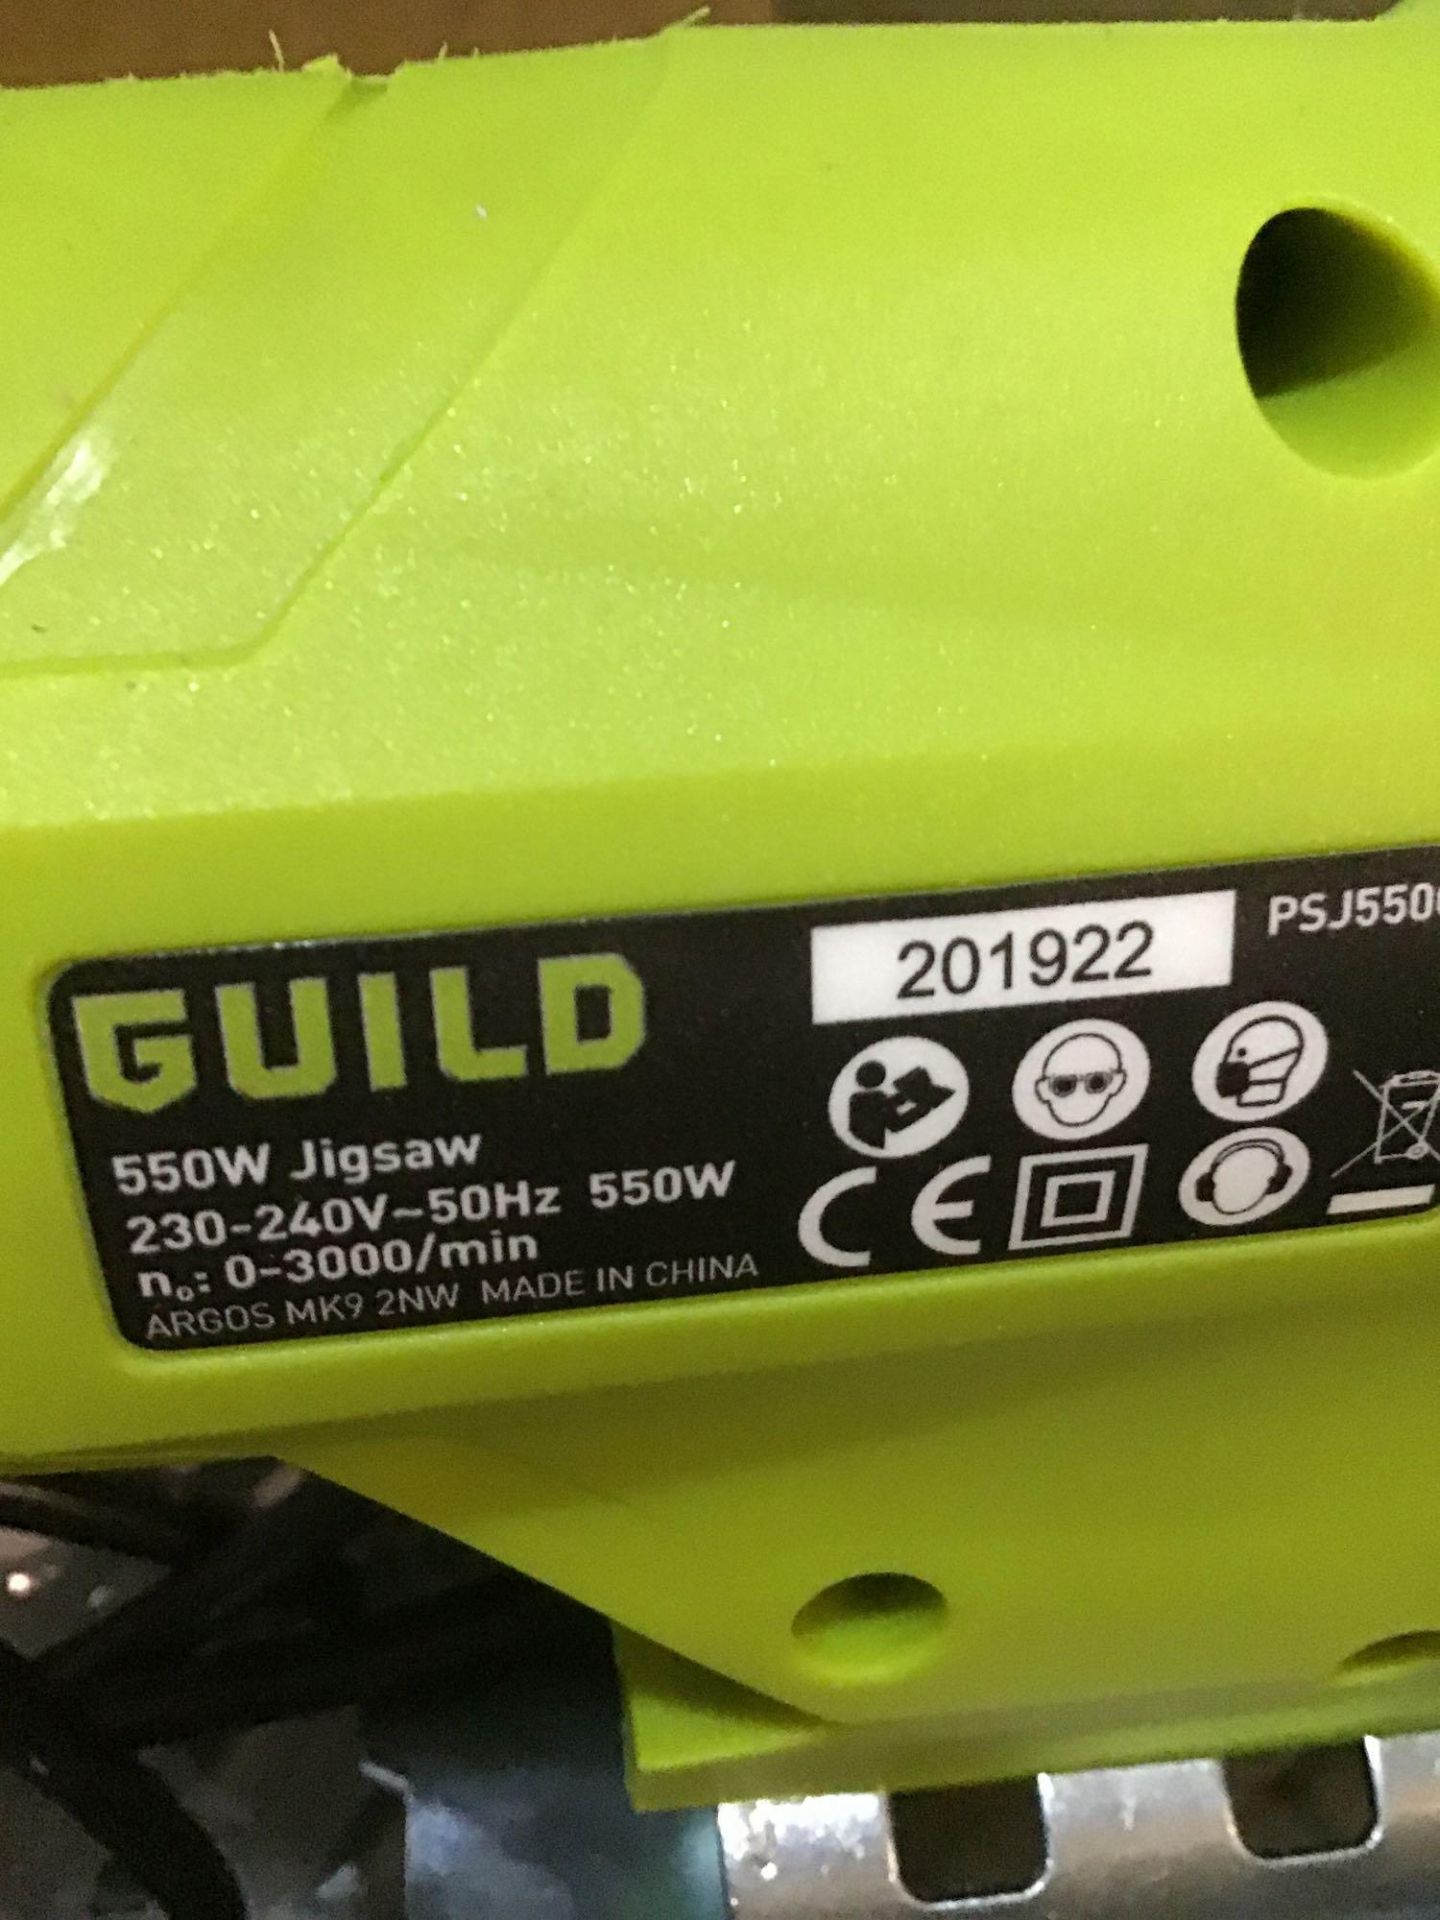 Guild Variable Speed Jigsaw - 550W PSJ550GL 455/3515 - £20.00 RRP - Image 4 of 6